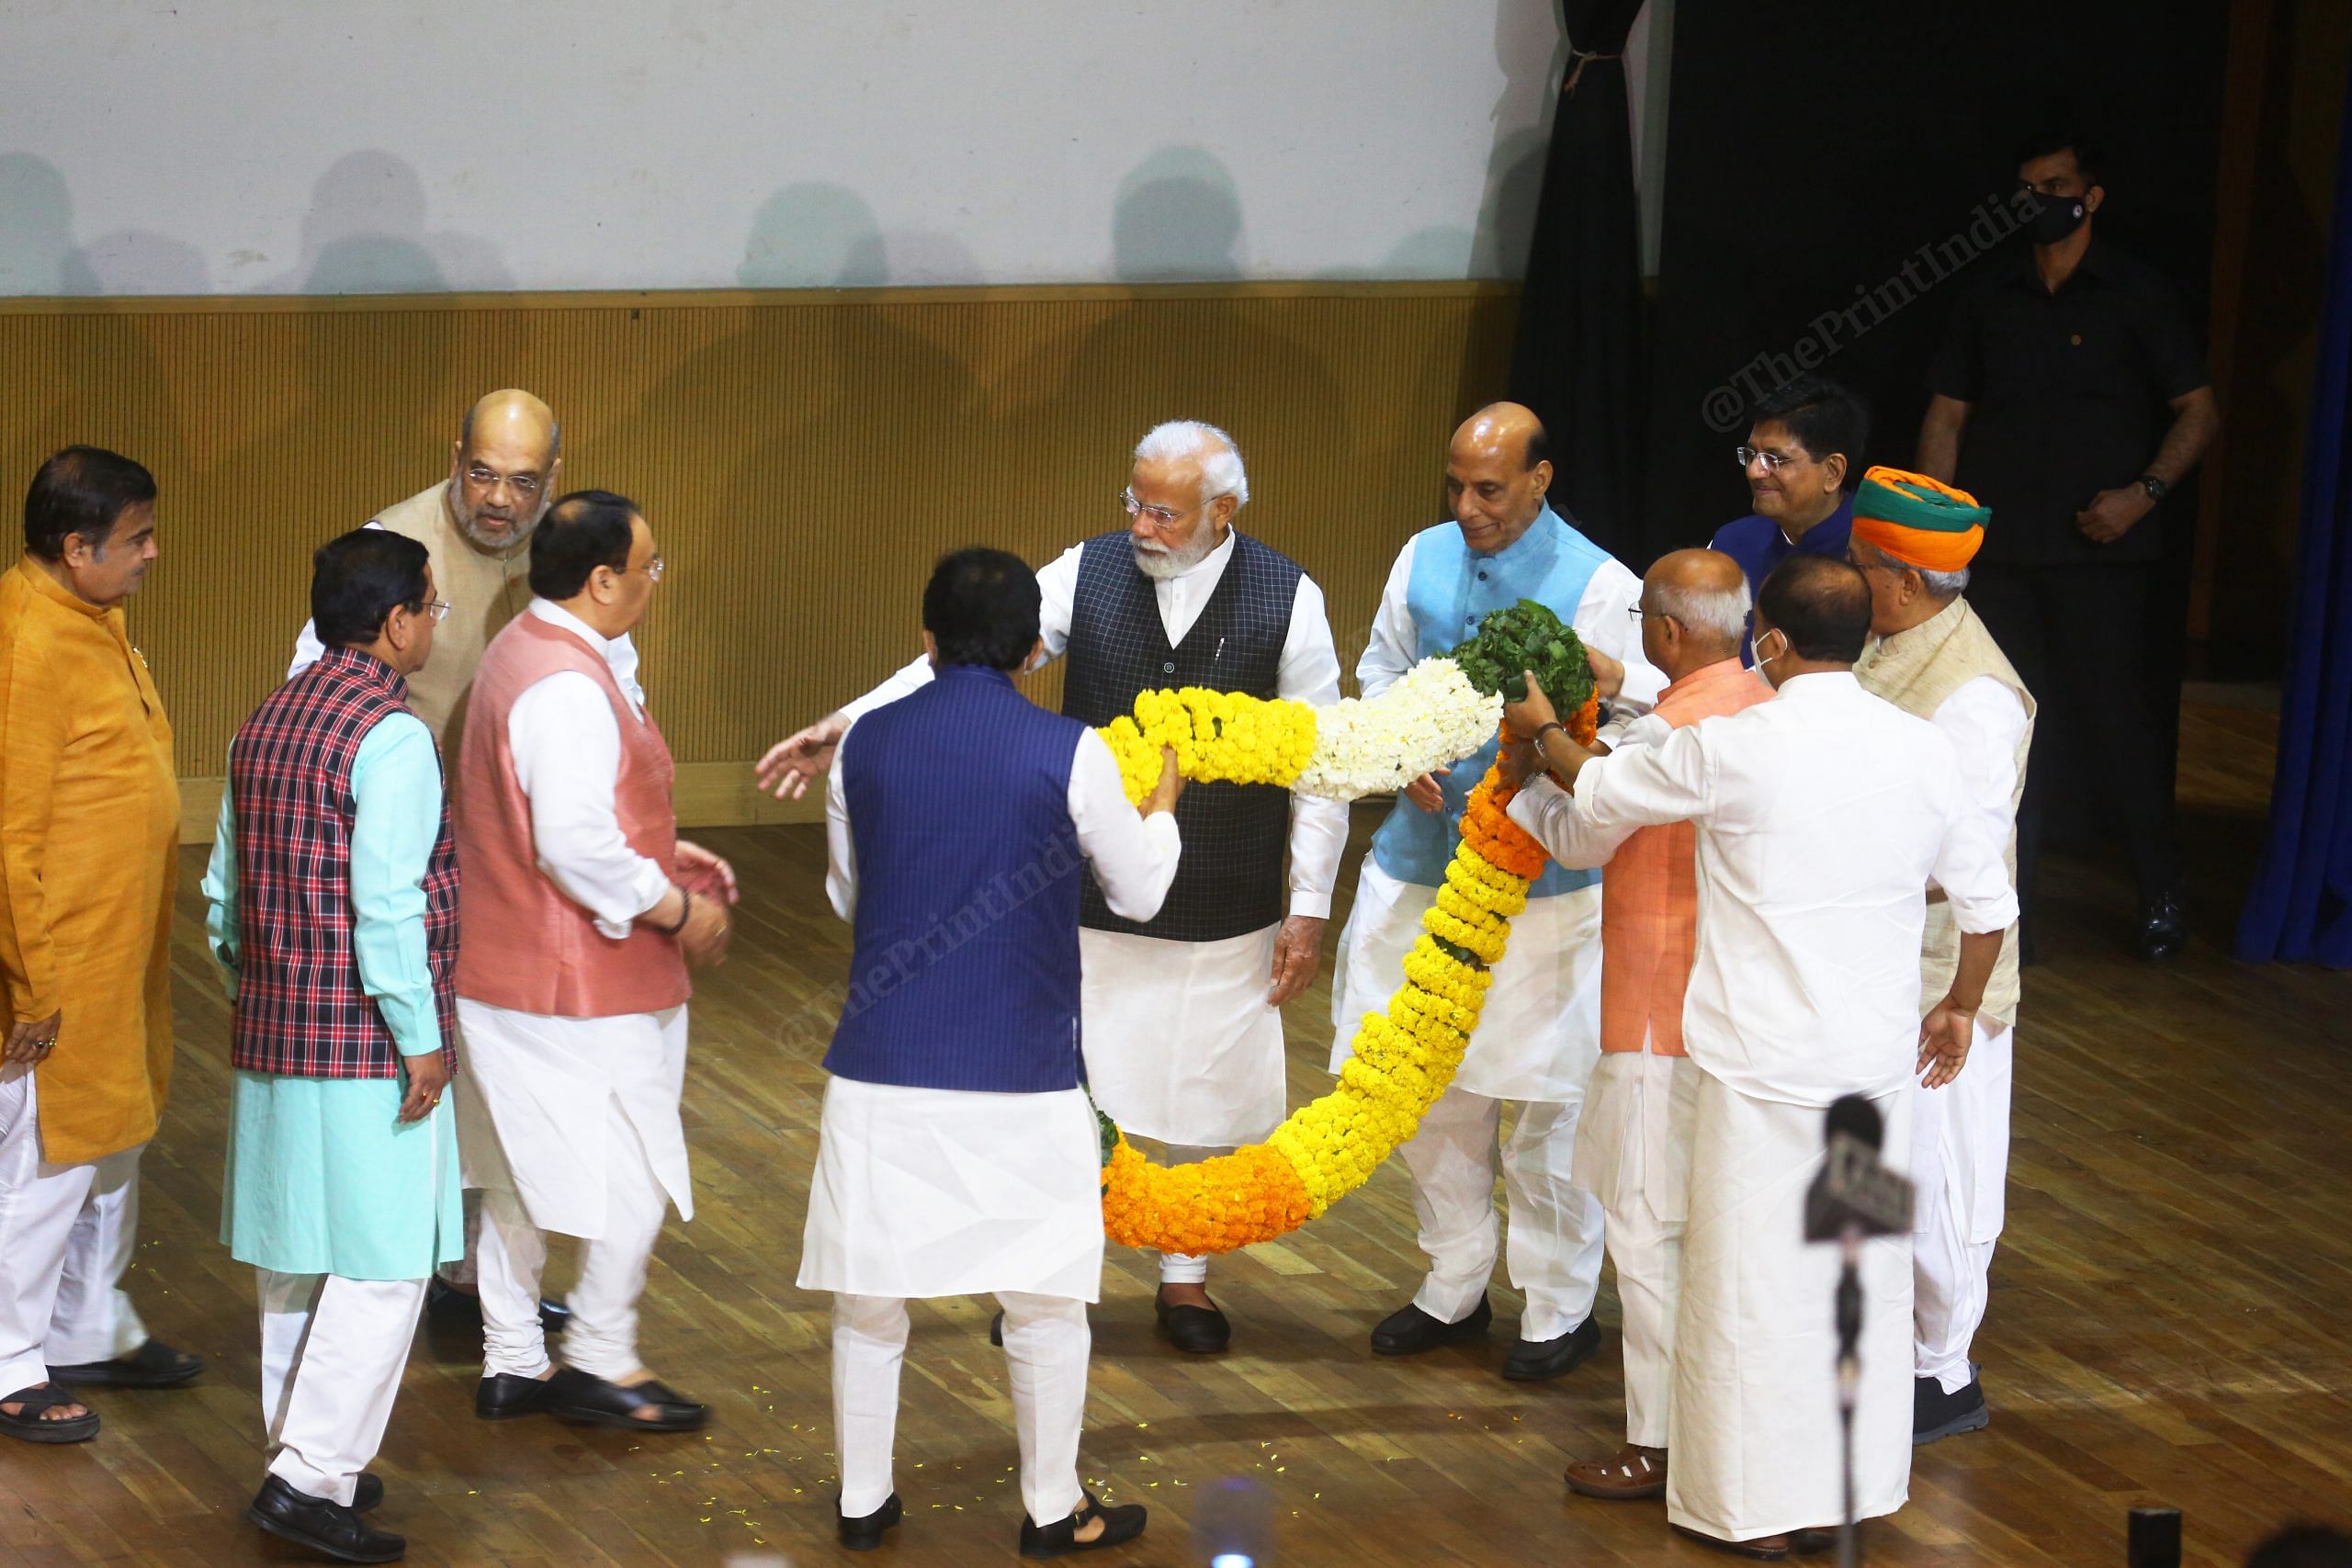 PM Modi asks party President J.P. Nadda to join him as he is garlanded | Photo: Praveen Jain | ThePrint